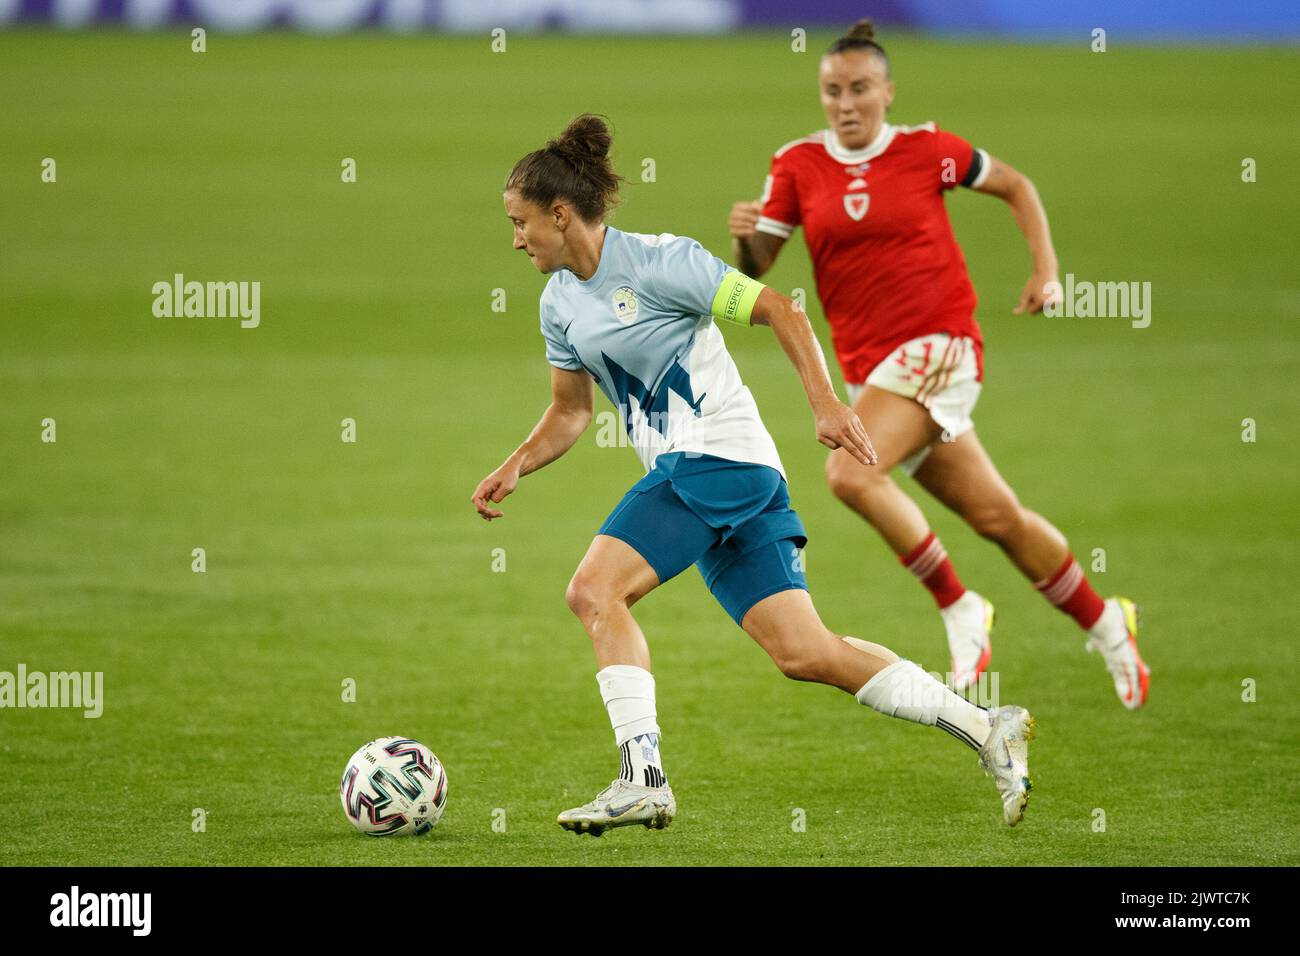 Cardiff, UK. 6th Sep, 2022. Mateja Zver of Slovenia during the Wales v Slovenia Women's World Cup Qualification match. Credit: Gruffydd Thomas/Alamy Live News Stock Photo